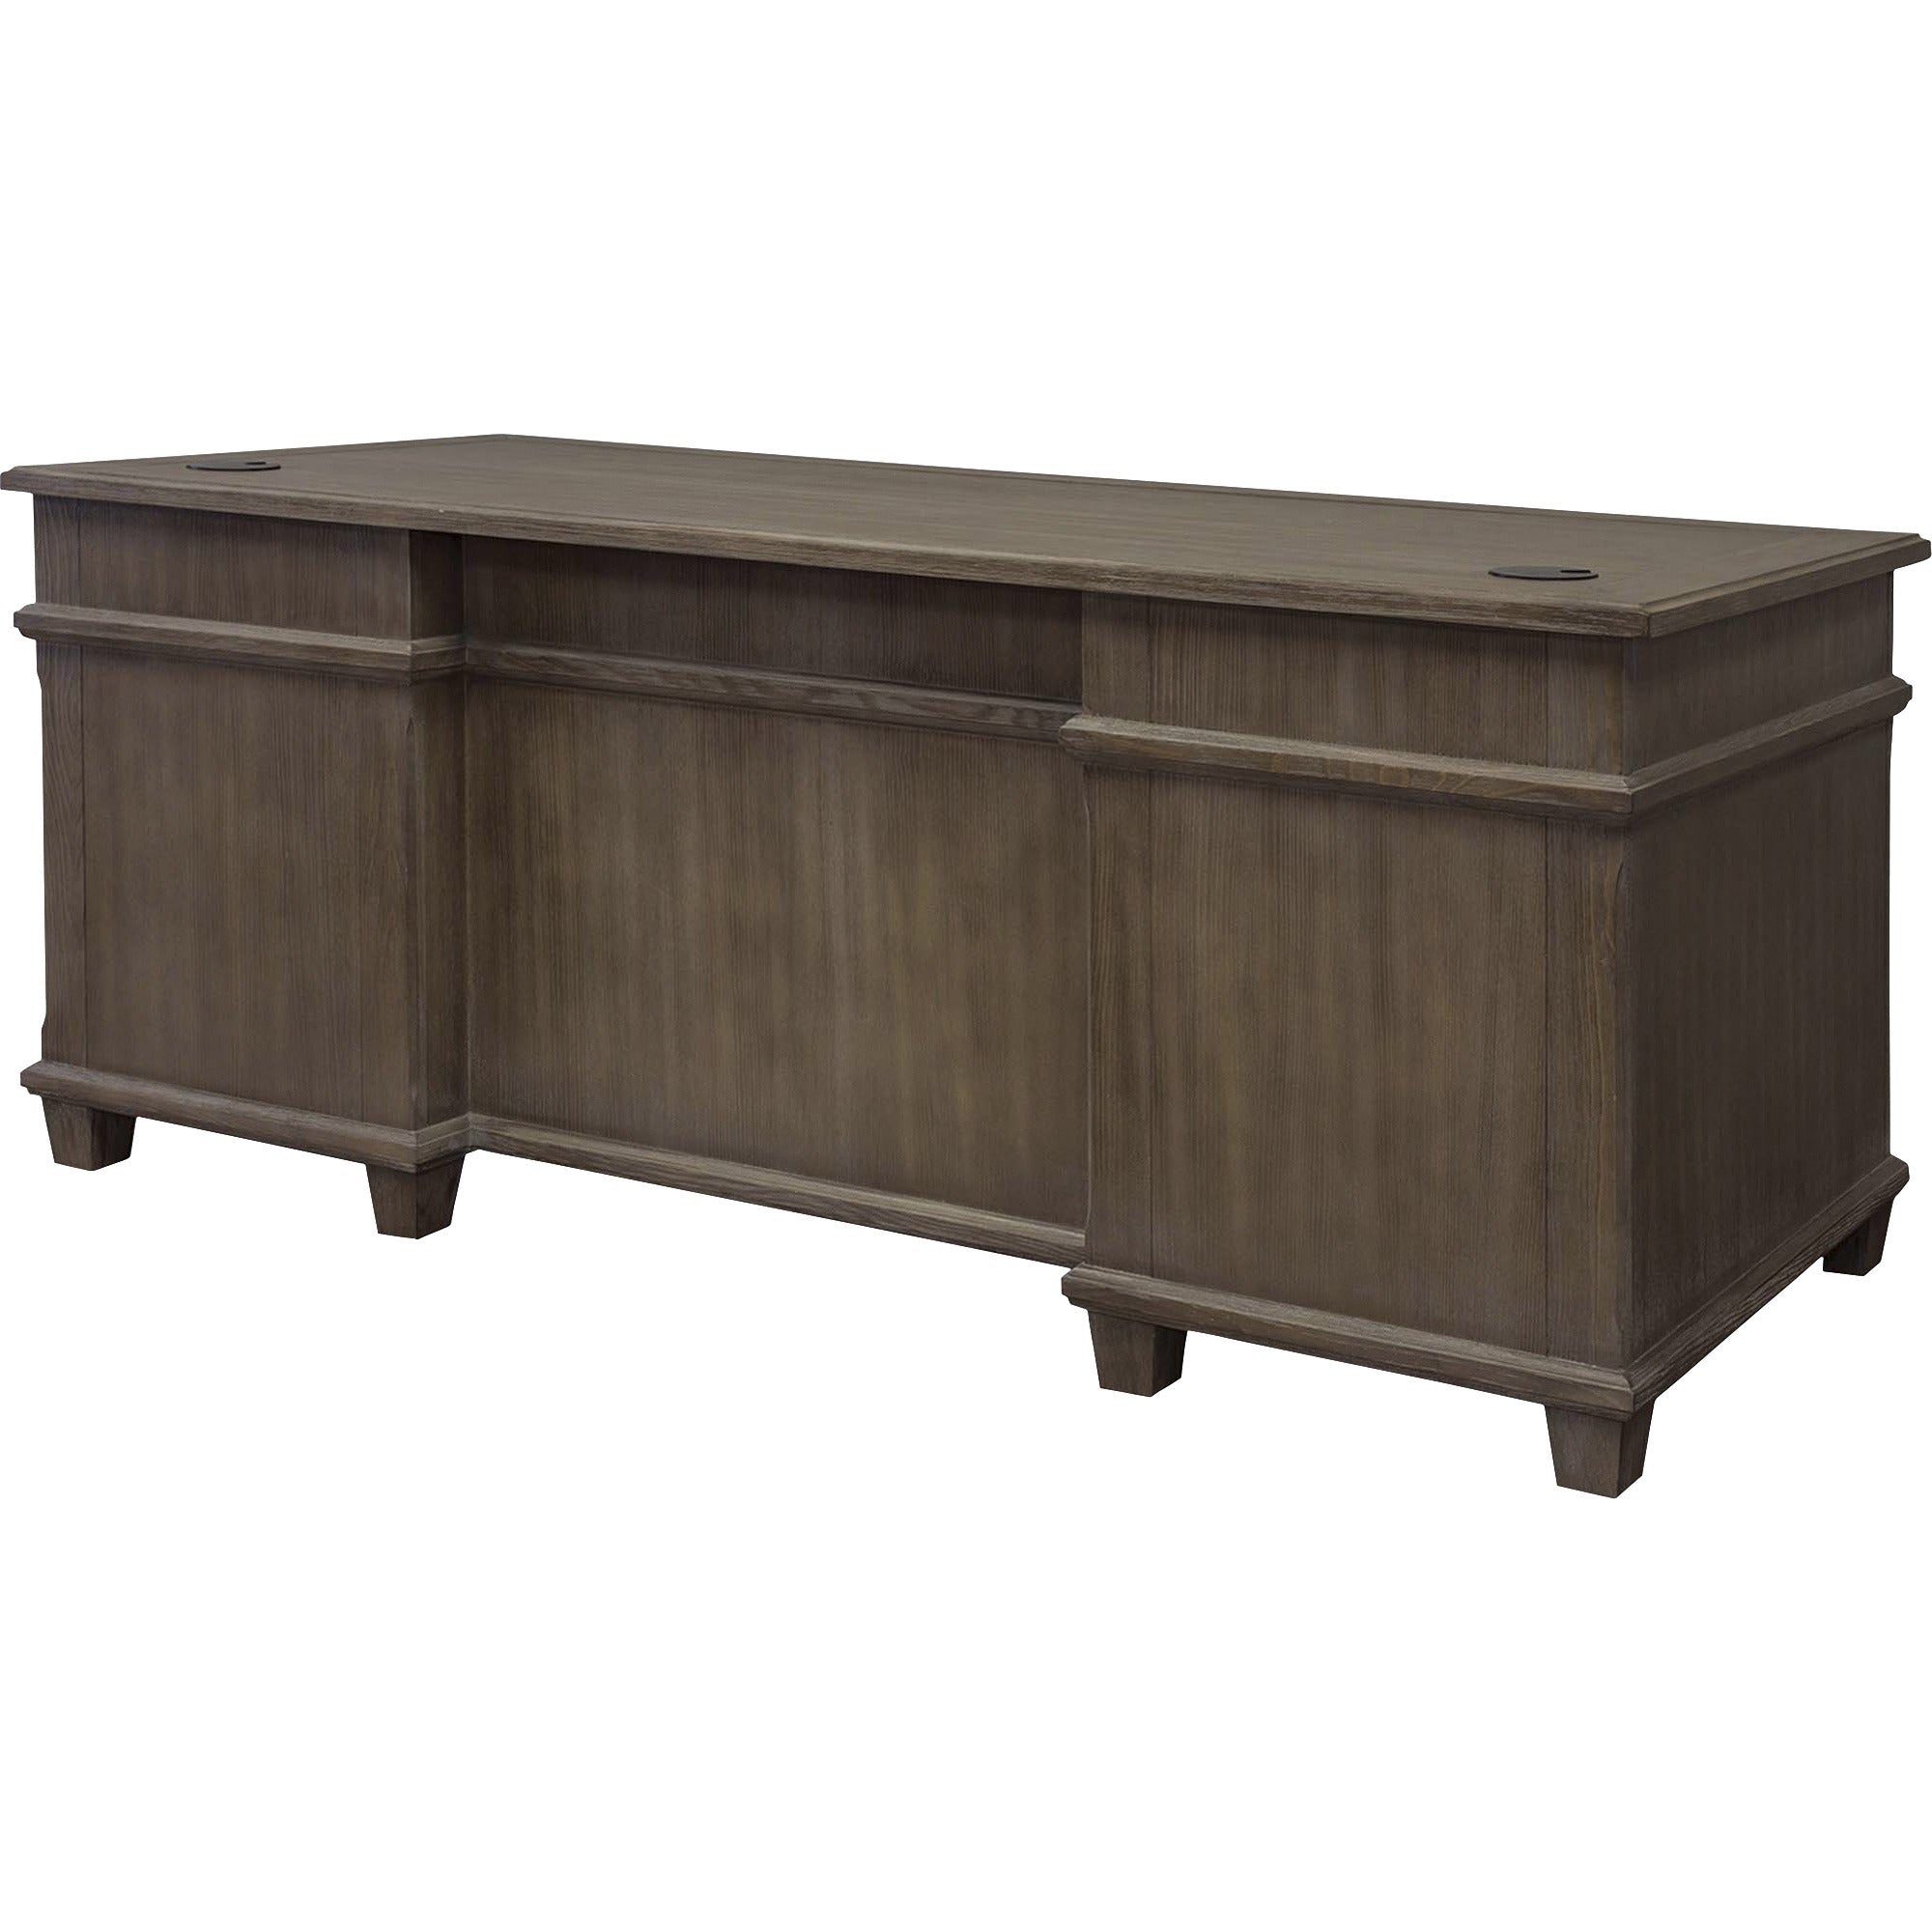 martin-carson-double-pedestal-desk-7-drawer-7-x-storage-utility-file-drawers-double-pedestal-material-veneer-solid-lumber-finish-weathered-dove_mrtimca680 - 1